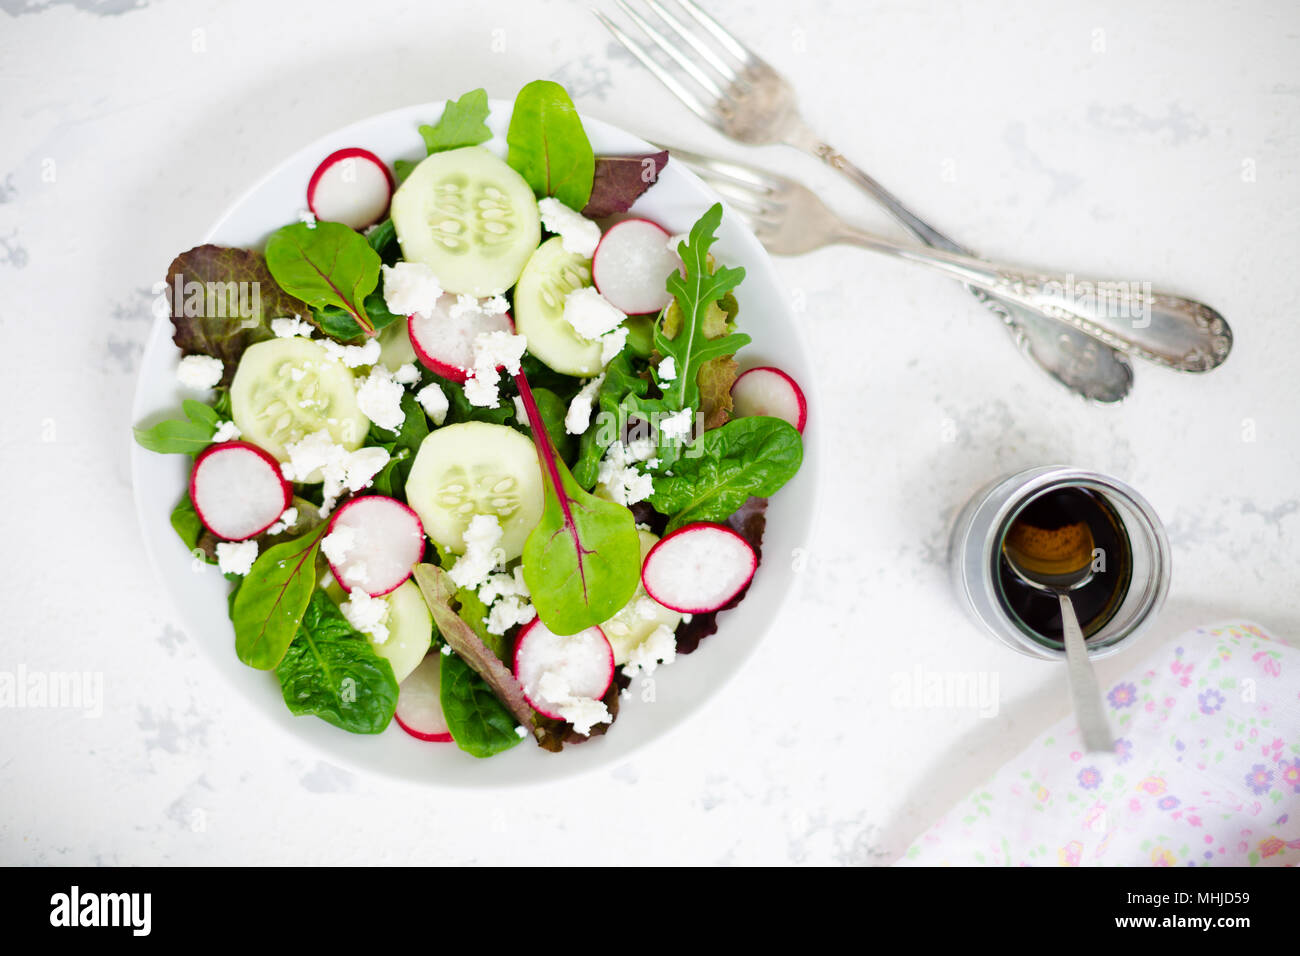 Mixed salad with baby leaves of red lettuce, tatsoi, arugula, red chard, radish, cucumber and feta cheese with olive oil and balsamic vinegar dressing Stock Photo